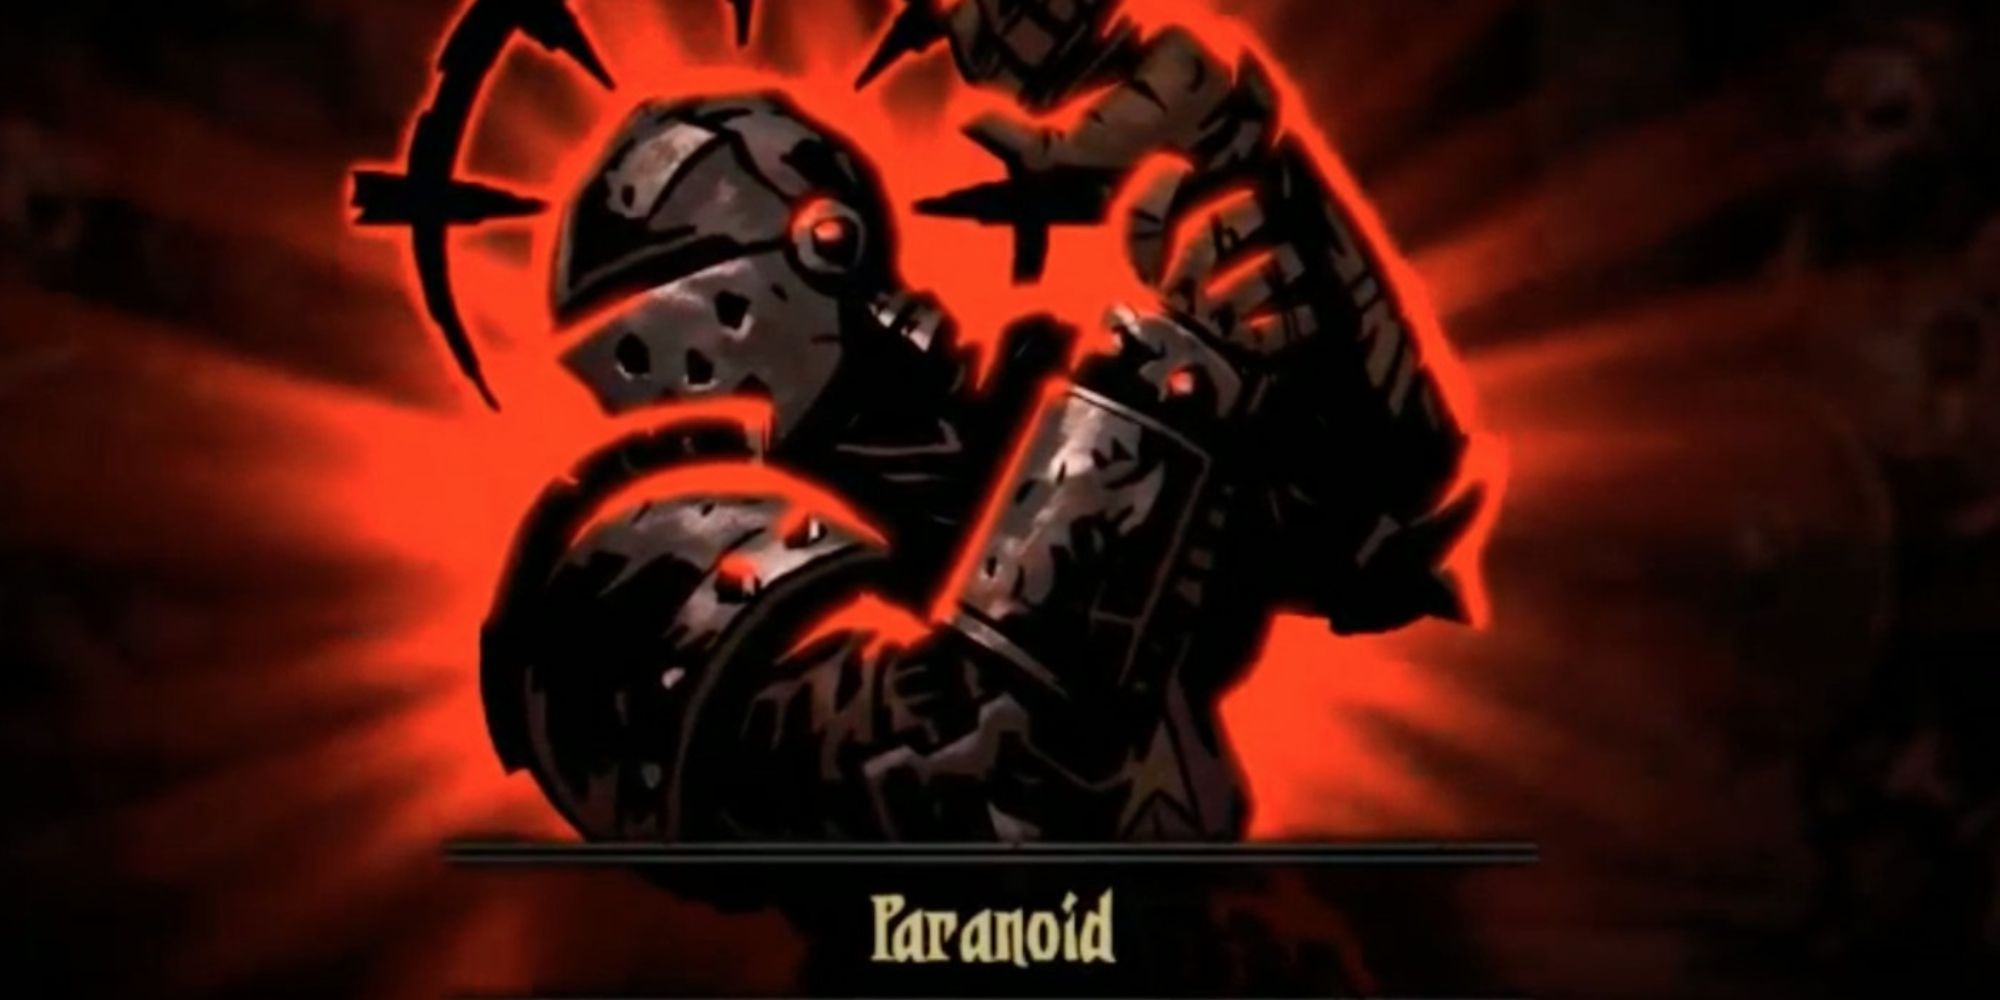 A crusader becomes paranoid in Darkest Dungeon.